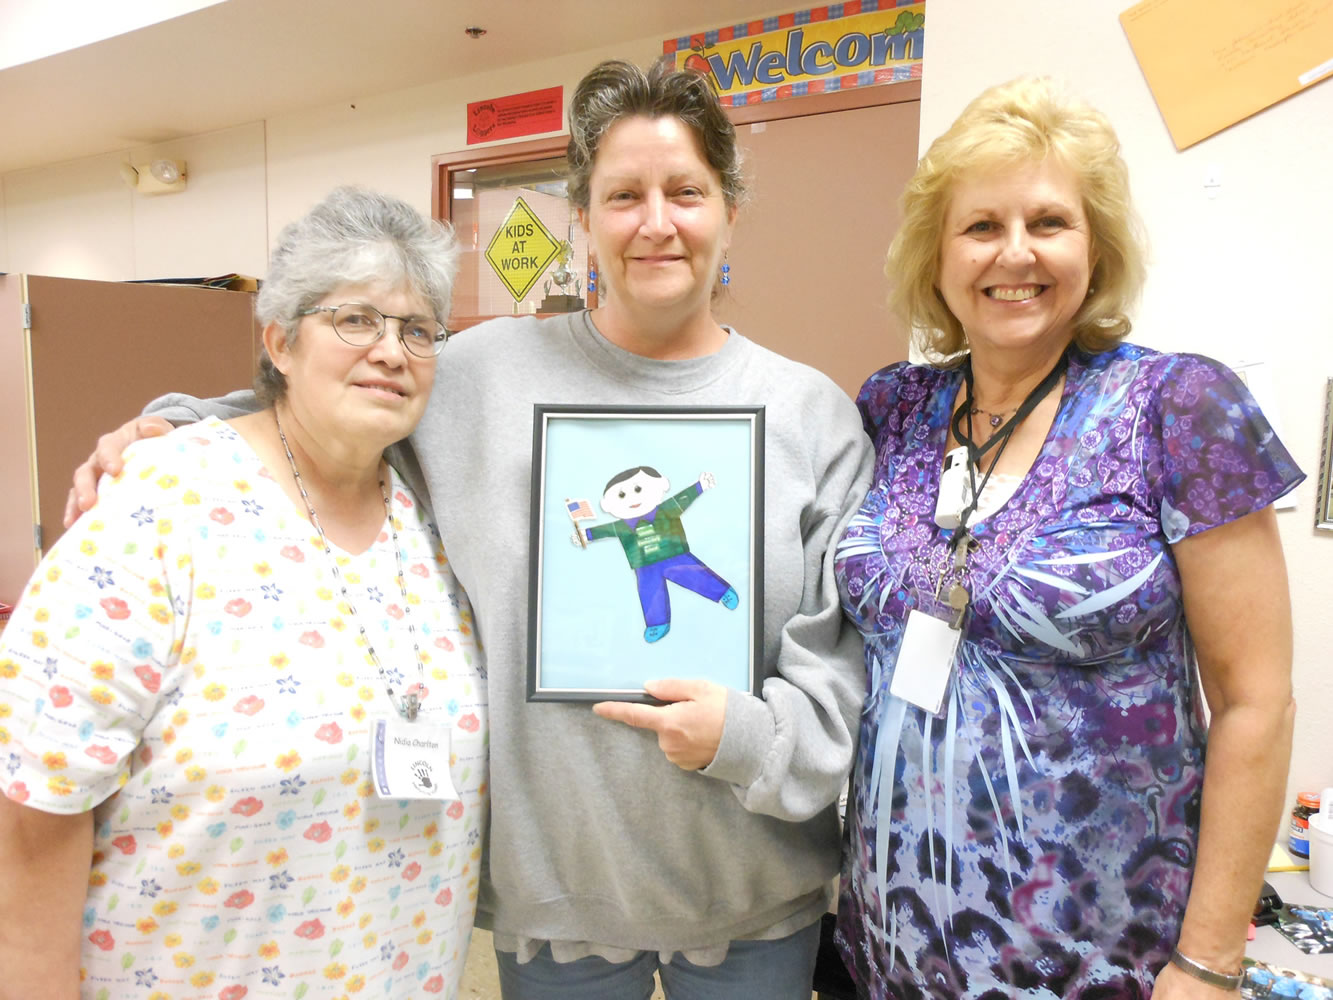 Lincoln: From left, Lincoln Elementary volunteers Nidia Charlton and Colleen Farrell, holding Flat Stanley, pose with first-grade teacher Kathy Johnson.